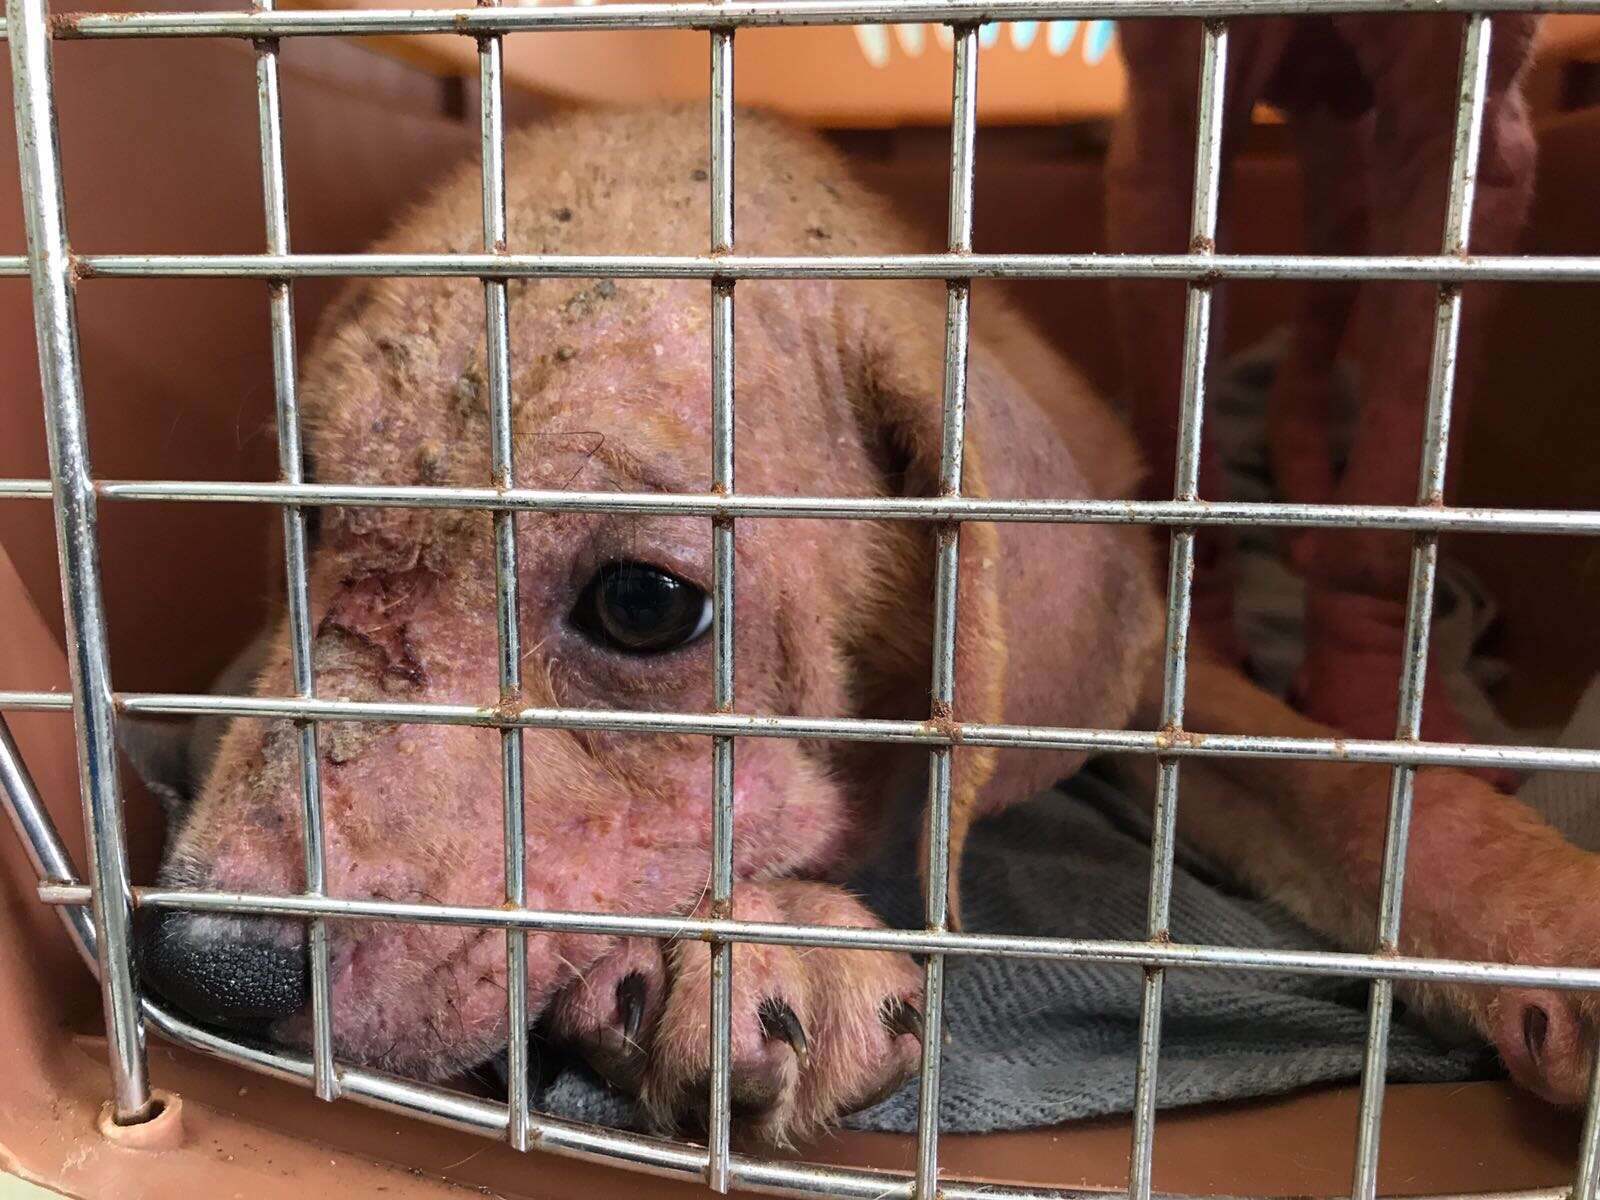 Sad looking puppy with bad mange inside traveling kennel